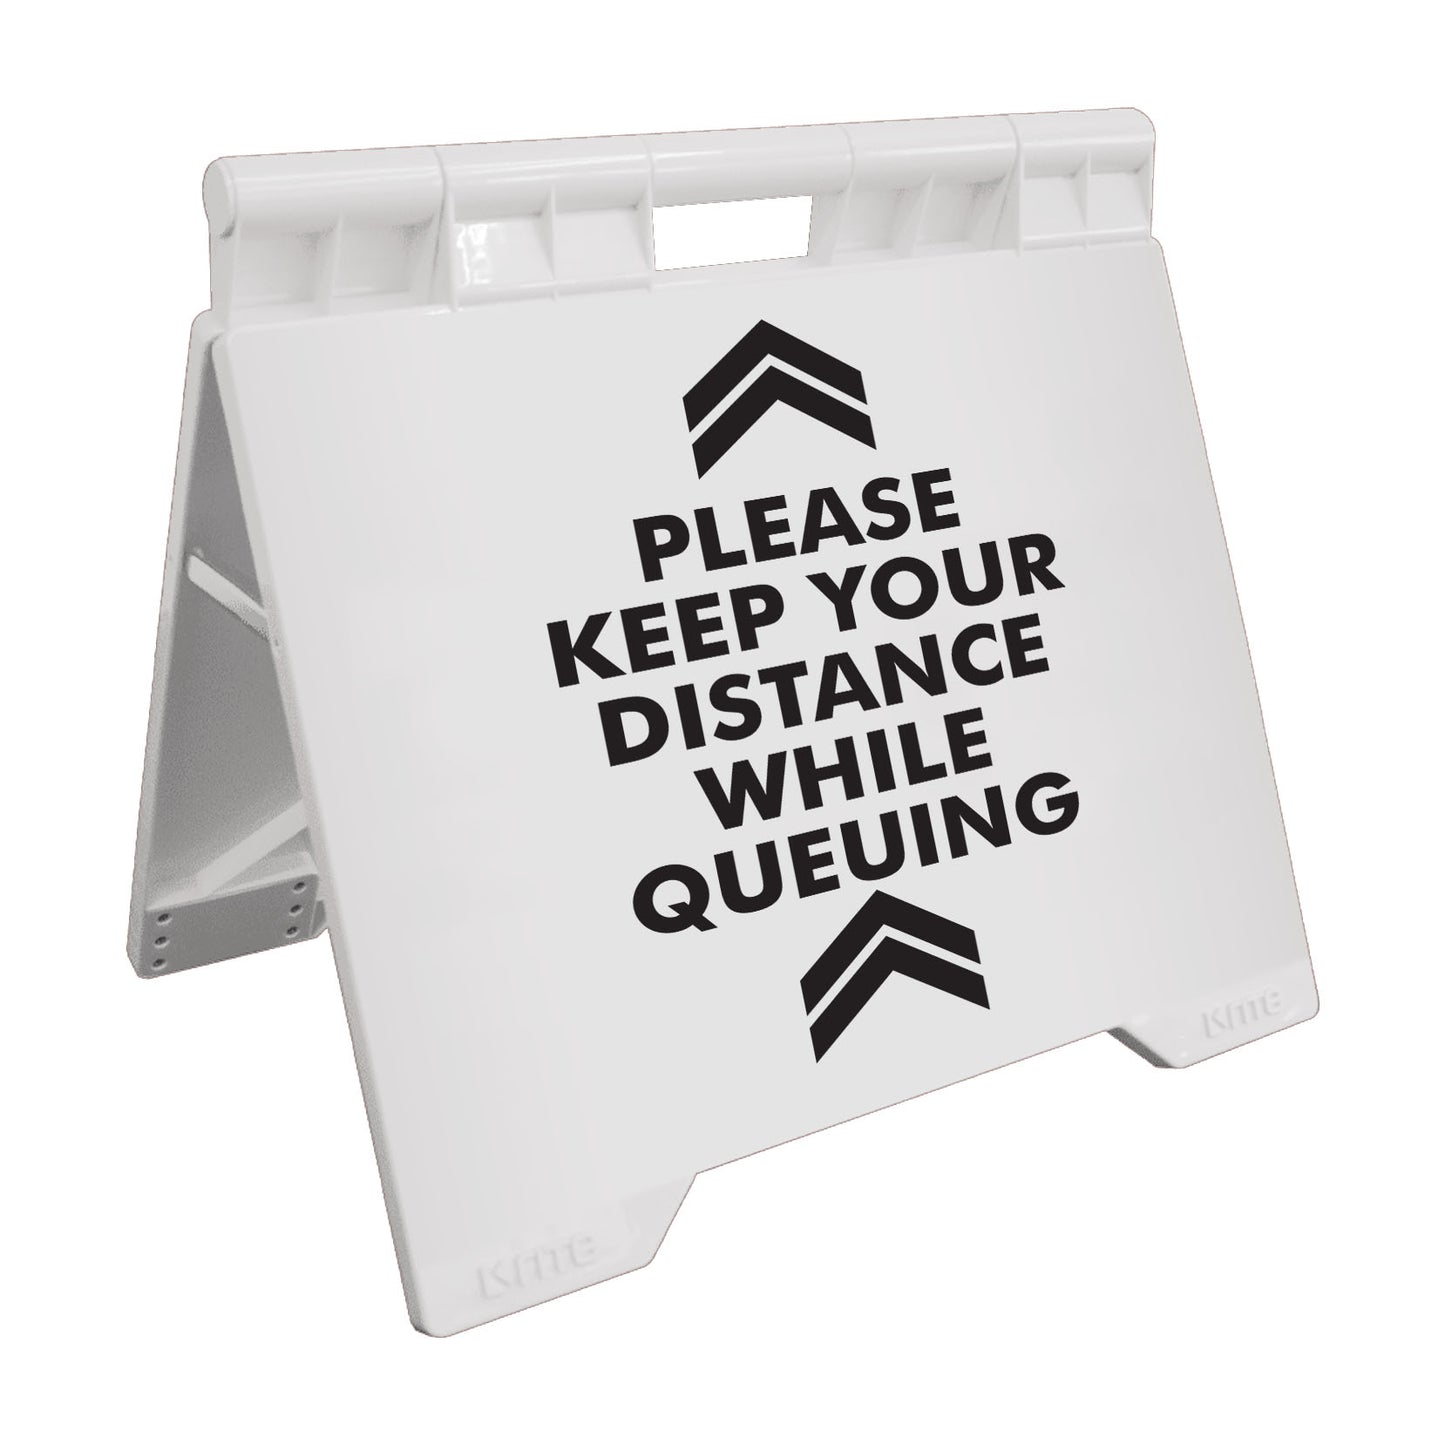 Please Keep Your Distance While Queuing - Evarite A-Frame Sign